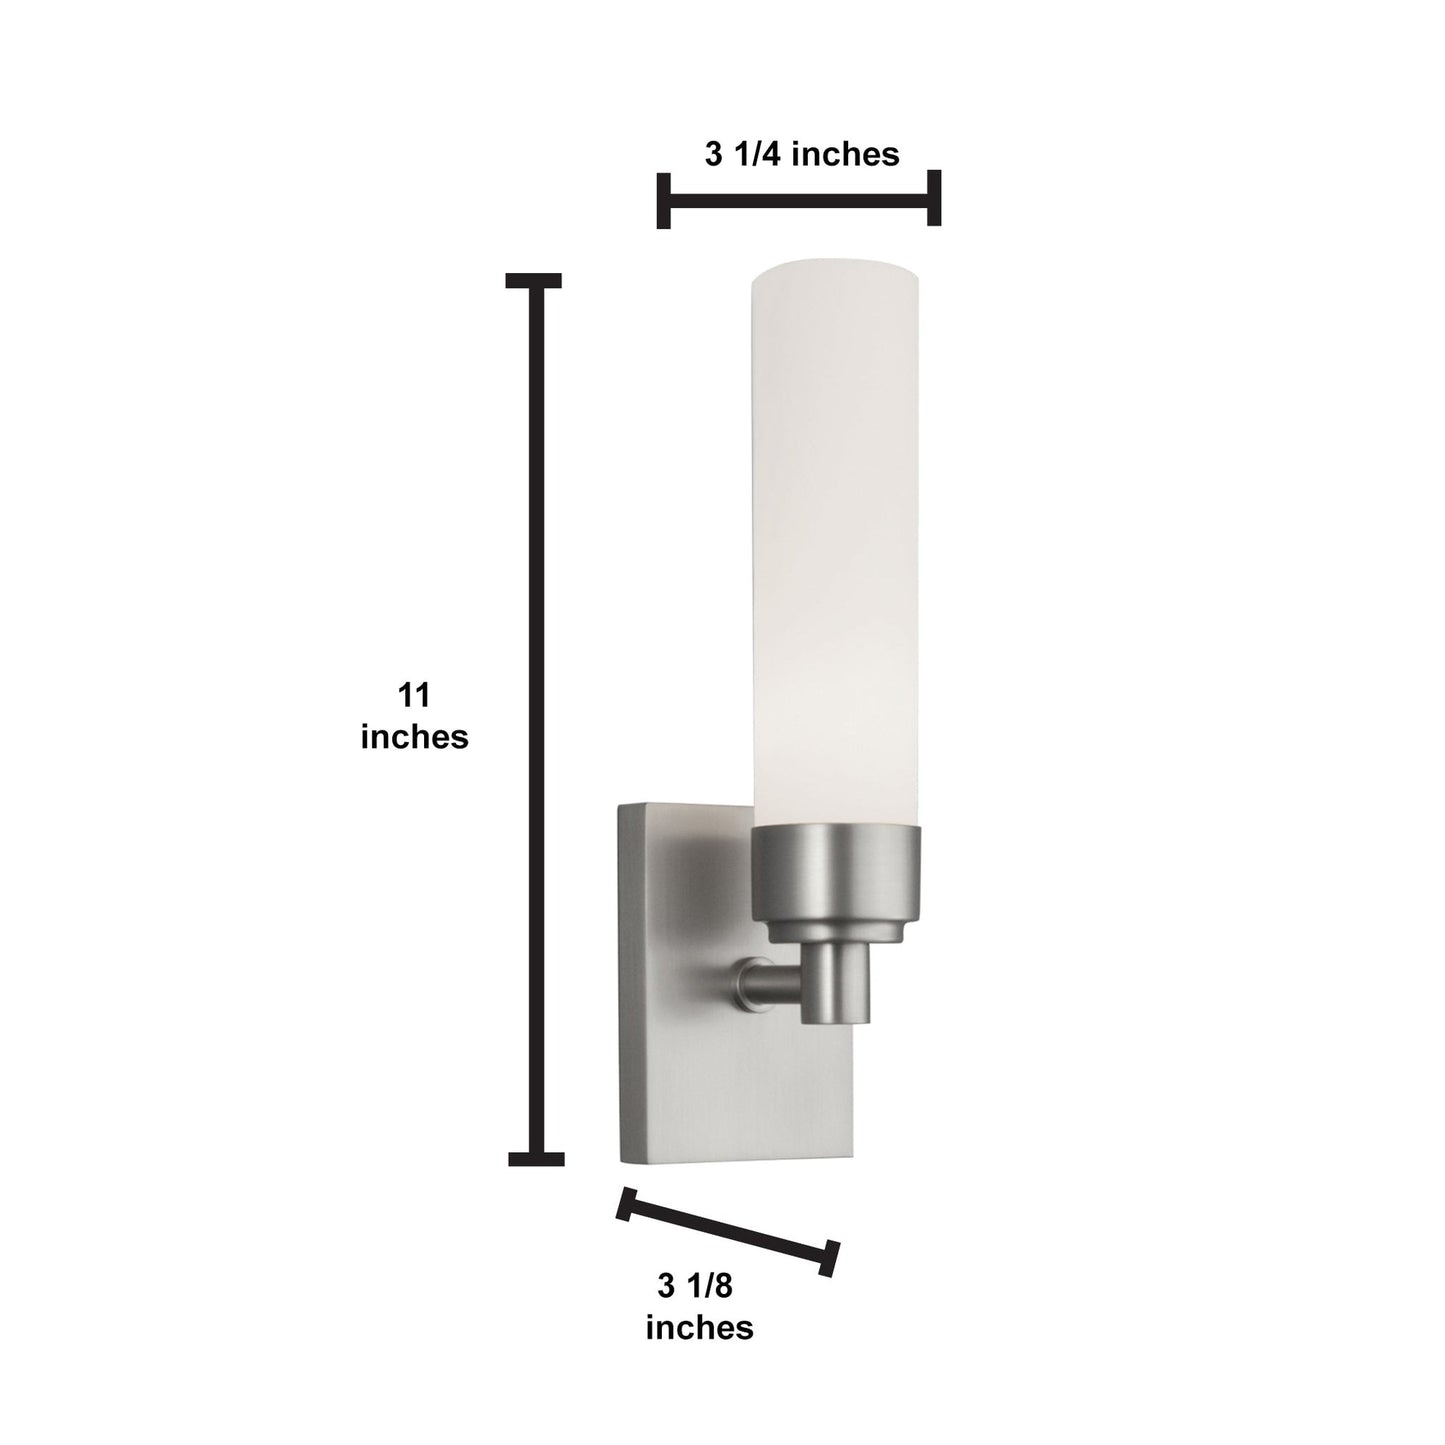 Norwell Lighting Alex 11" x 3" 1-Light Polished Nickel Vanity Light With Shiny Opal Glass Diffuser